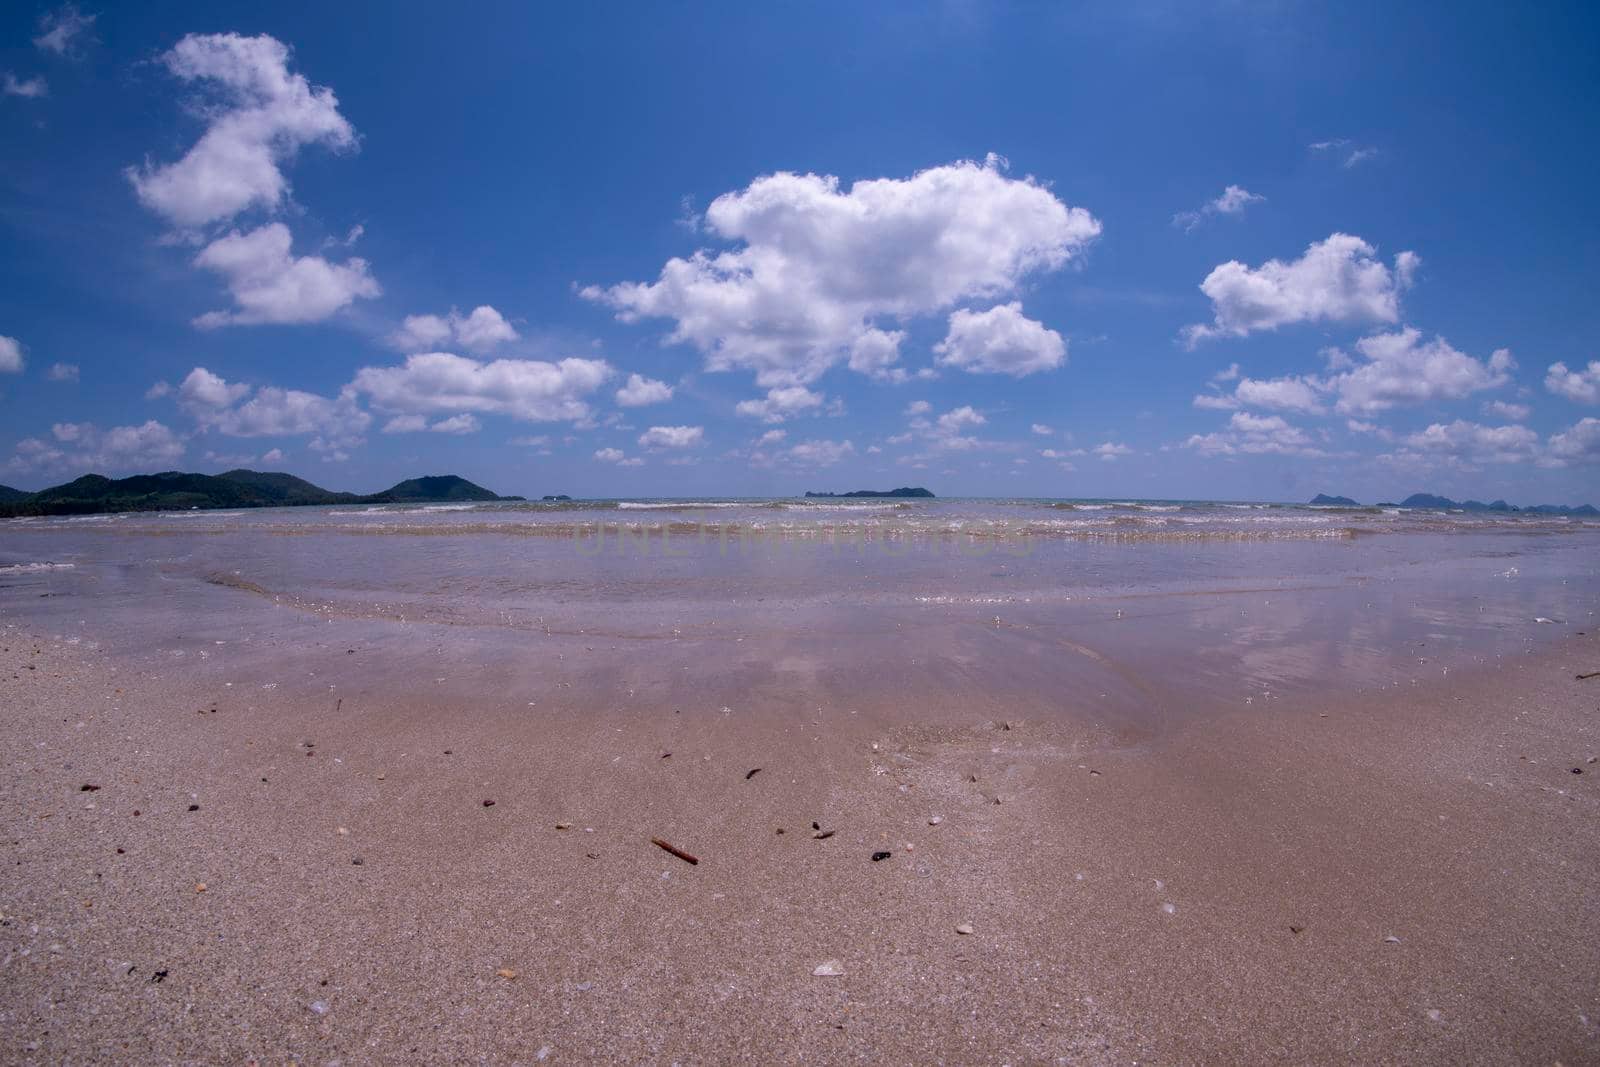 Daytime beach wide angle. Sairee Beach, March 2019. Fluffy white clouds and blue skies.